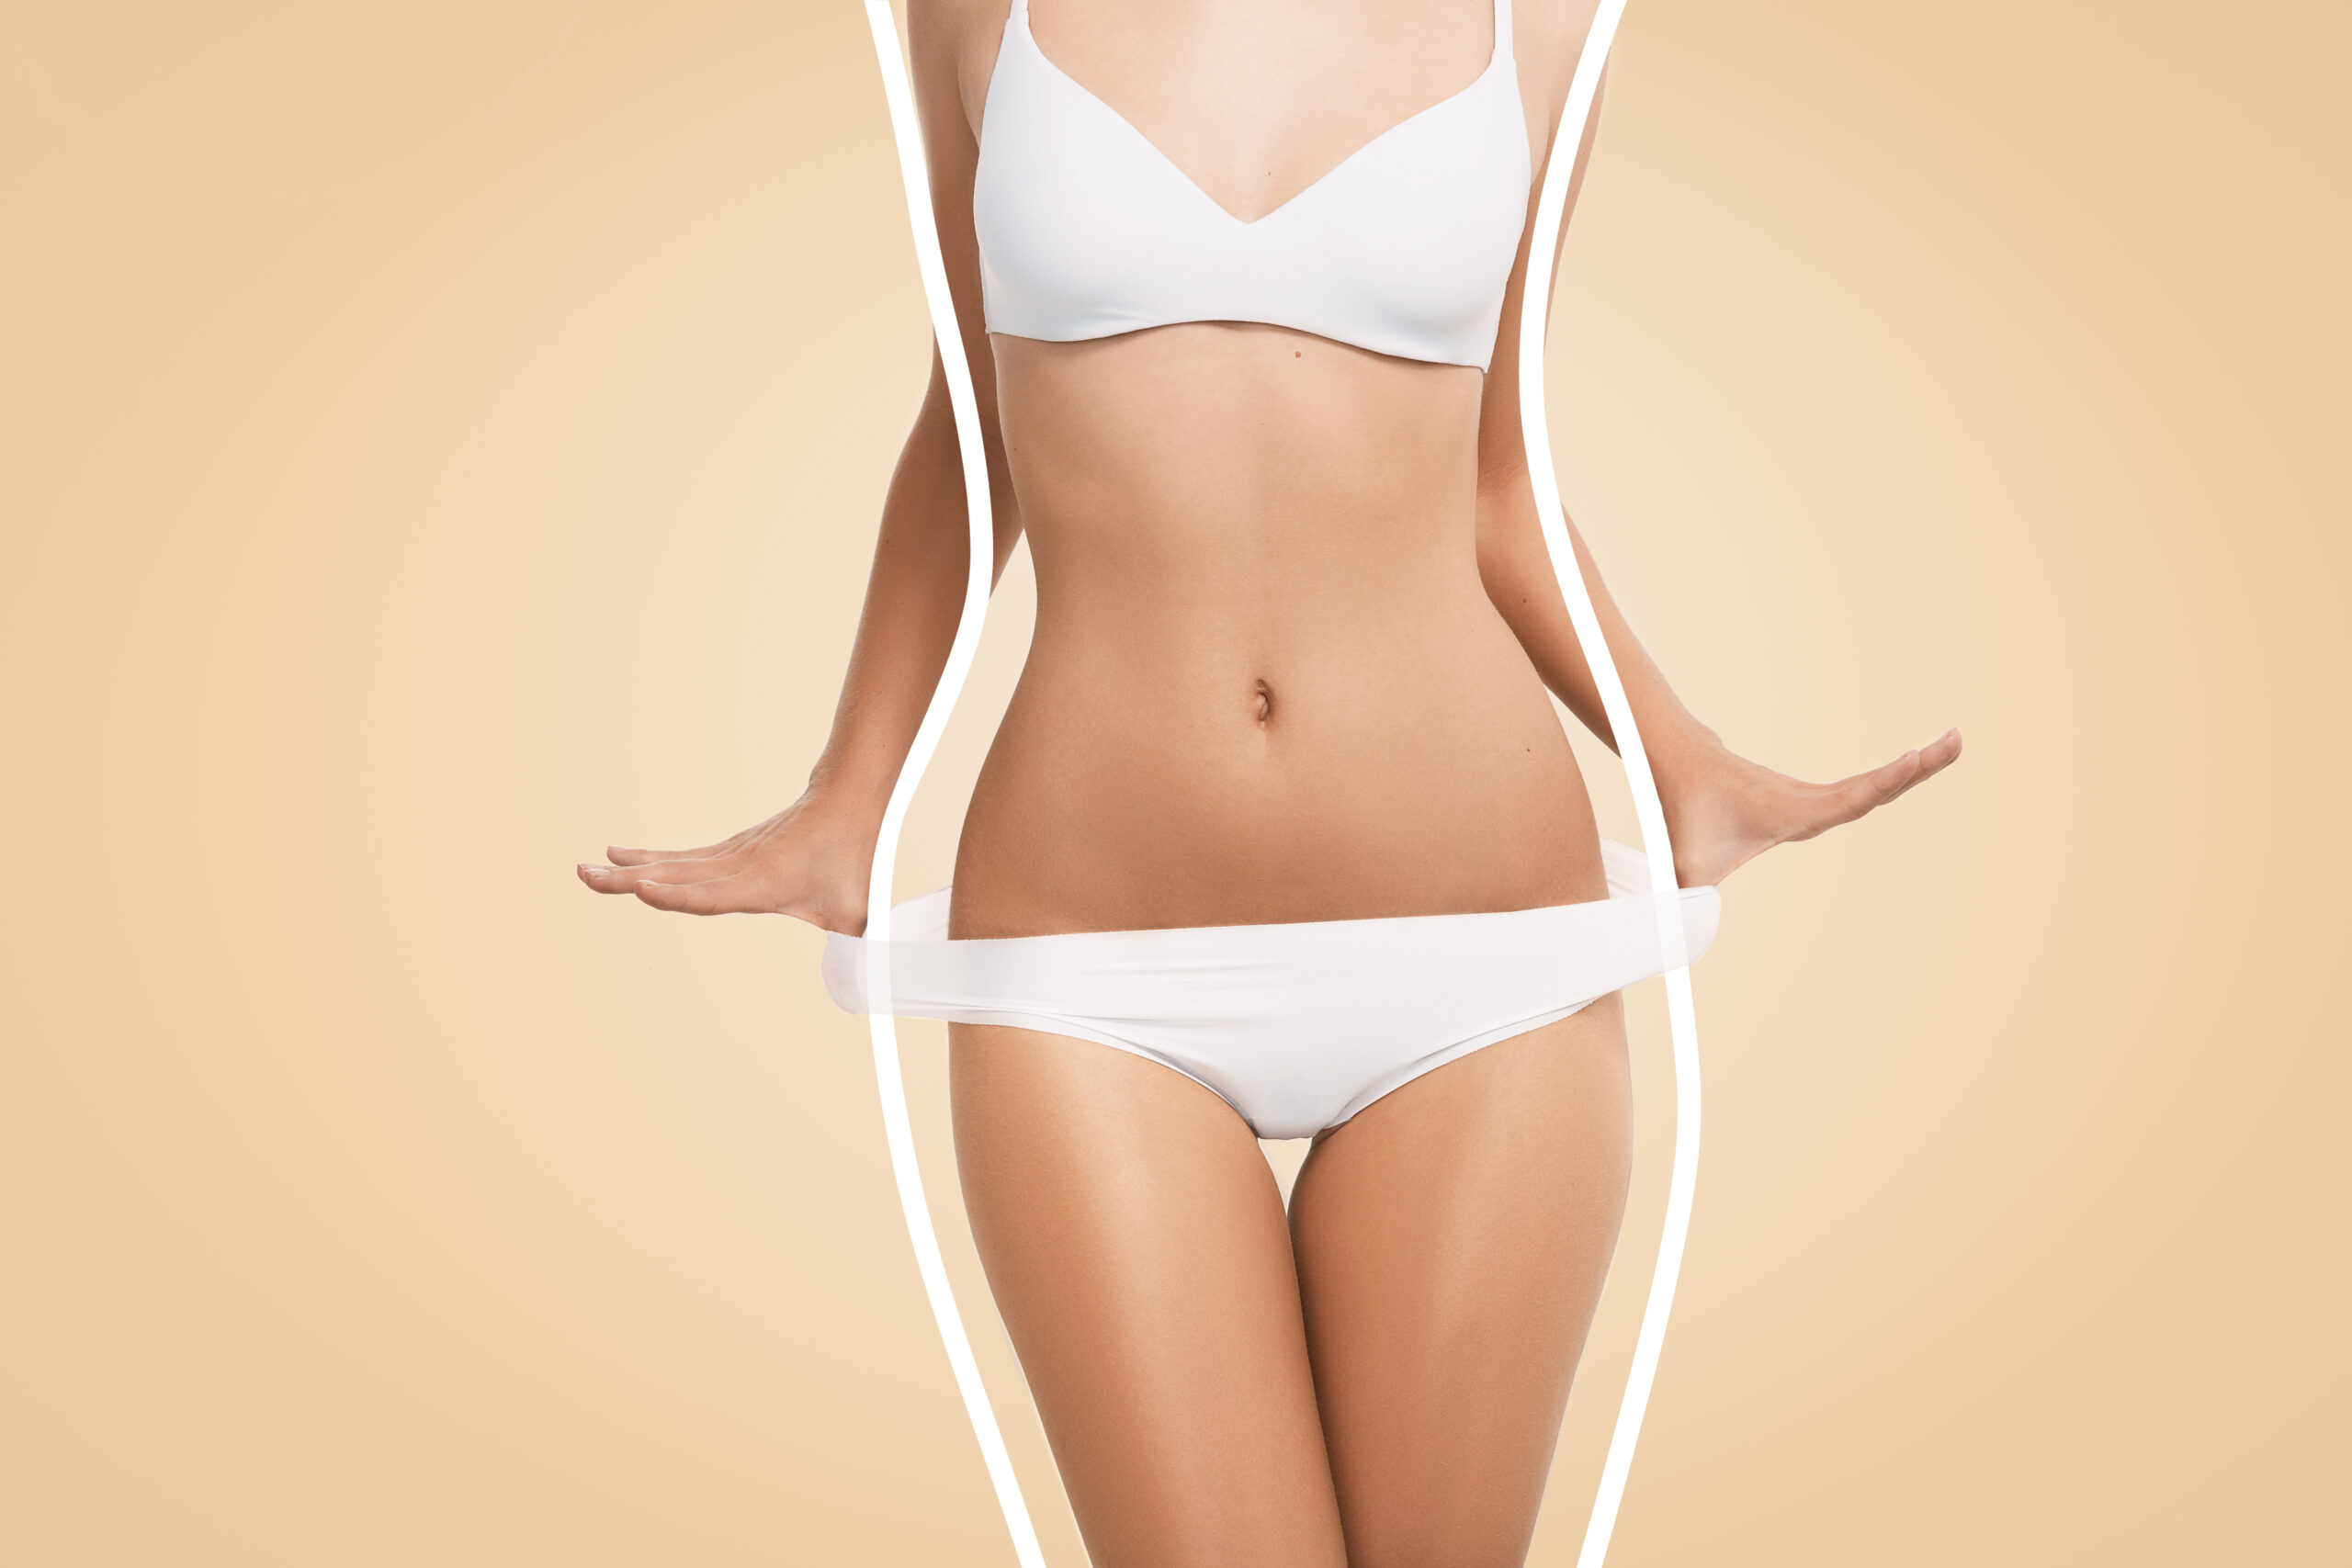 Plastic Surgery After Weight Loss - what to expect body contouring tummy tuck london plastic surgeon mummy makeover